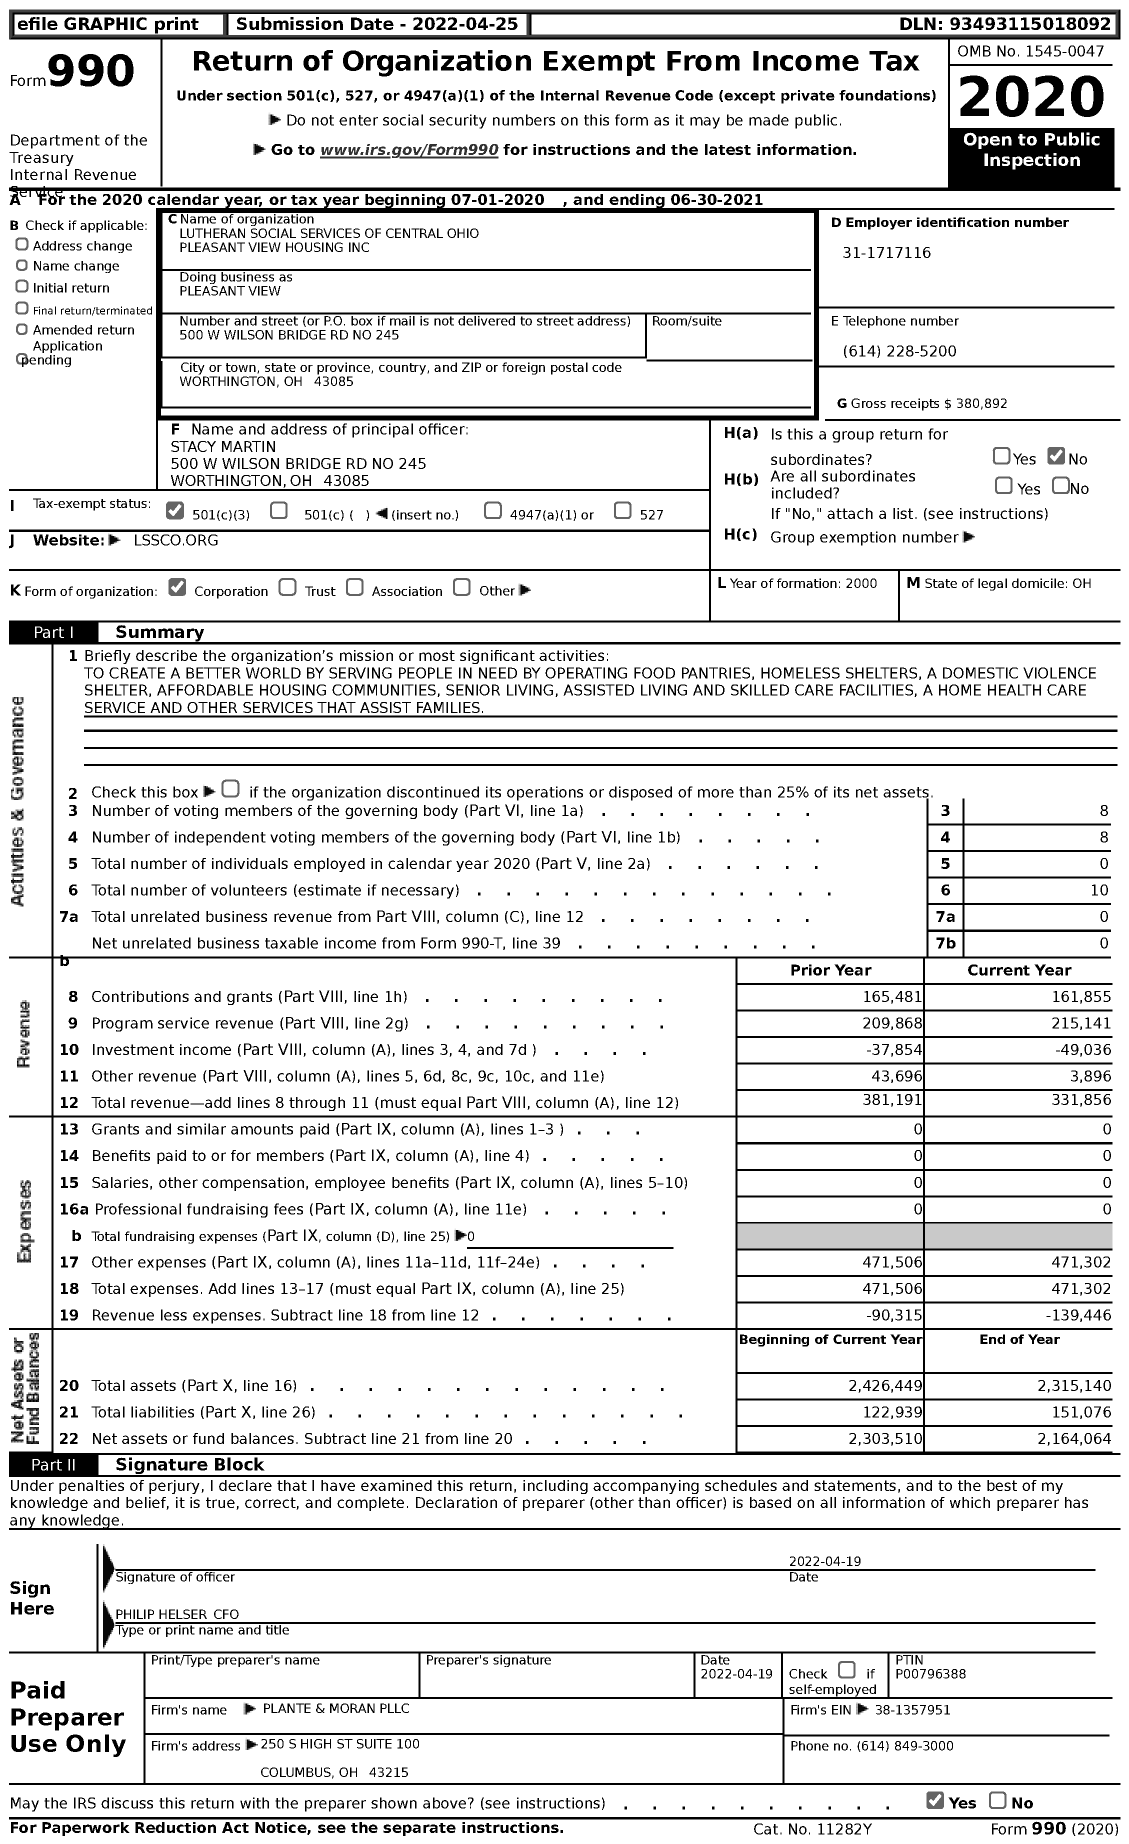 Image of first page of 2020 Form 990 for Pleasant View / Lutheran Social Services of Central Ohio Pleasant View Housing Inc